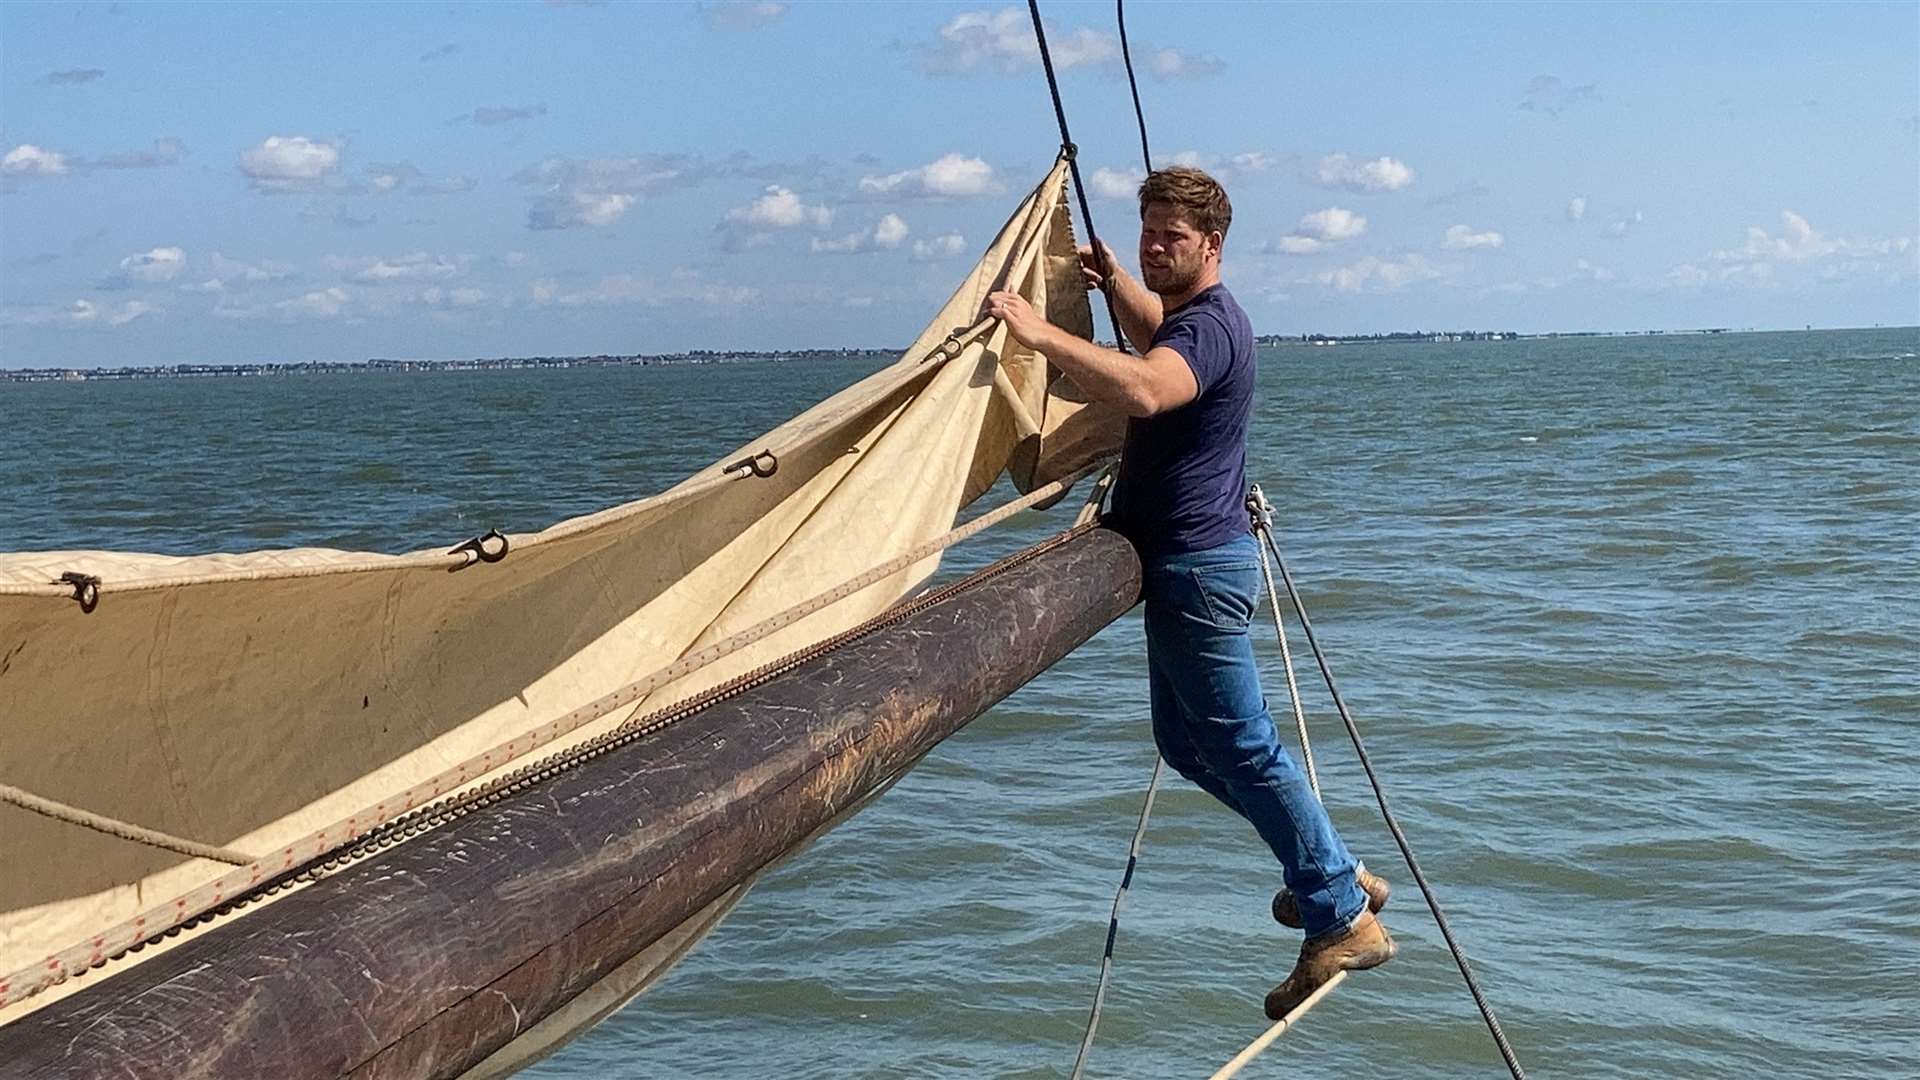 Ed Gransden balancing precariously on the bowsprit of the Thames sailing barge the Edith May as it sets sail from Sheppey